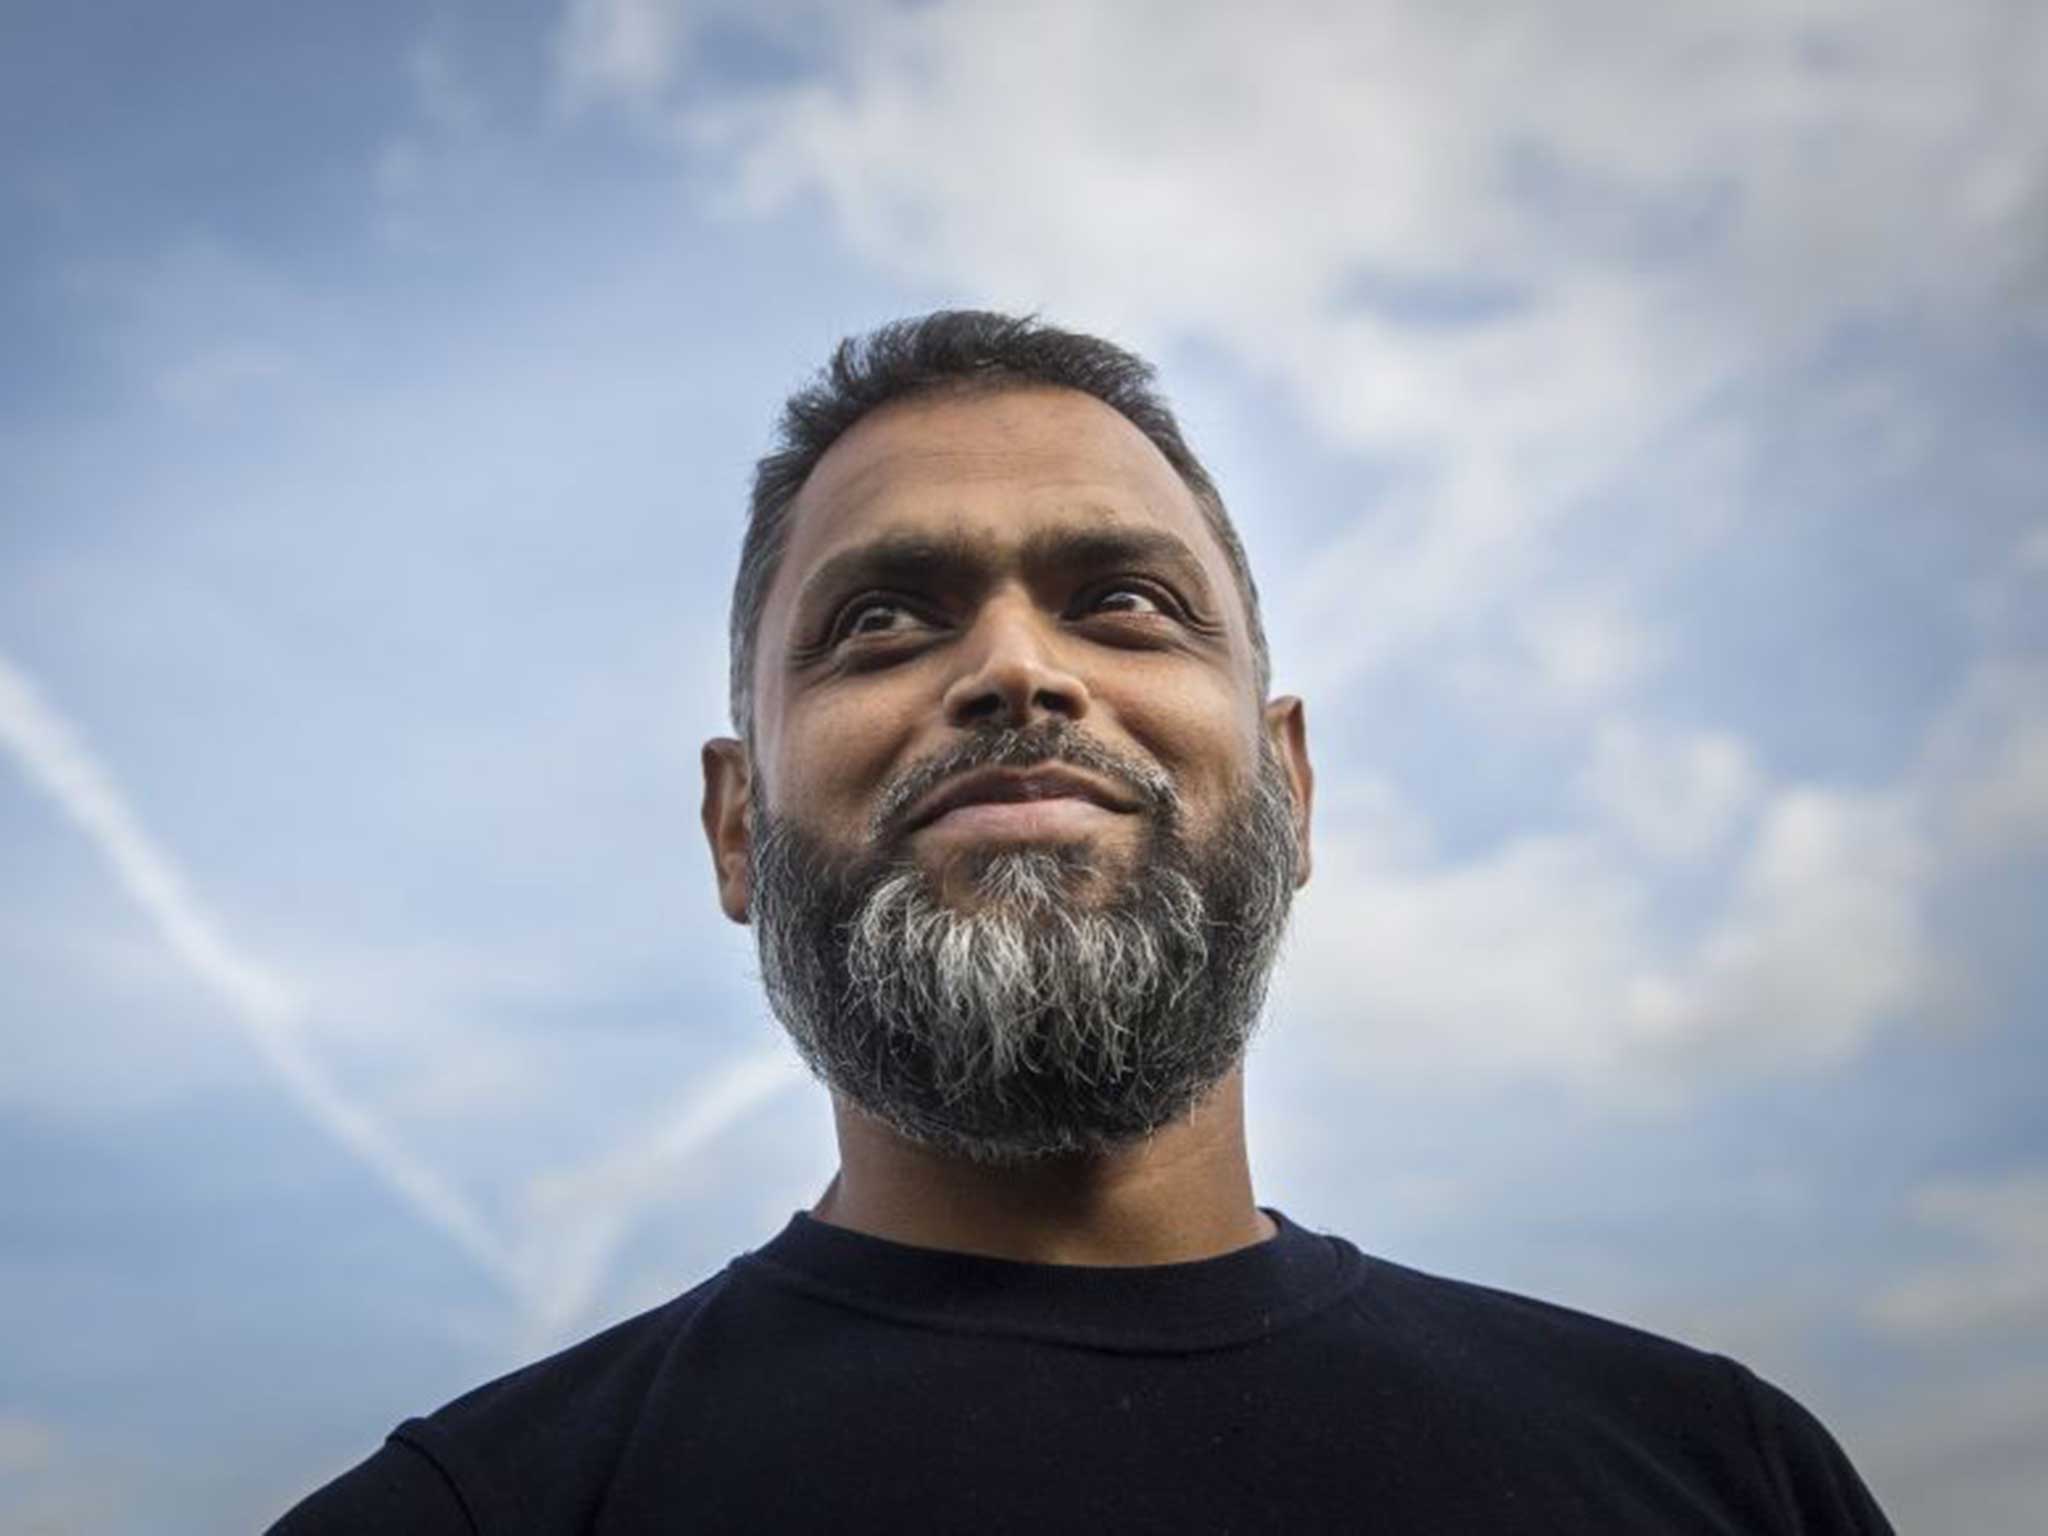 Moazzam Begg leaves Belmarsh prison in October after seven terrorism-related charges against him were dropped by the CPS